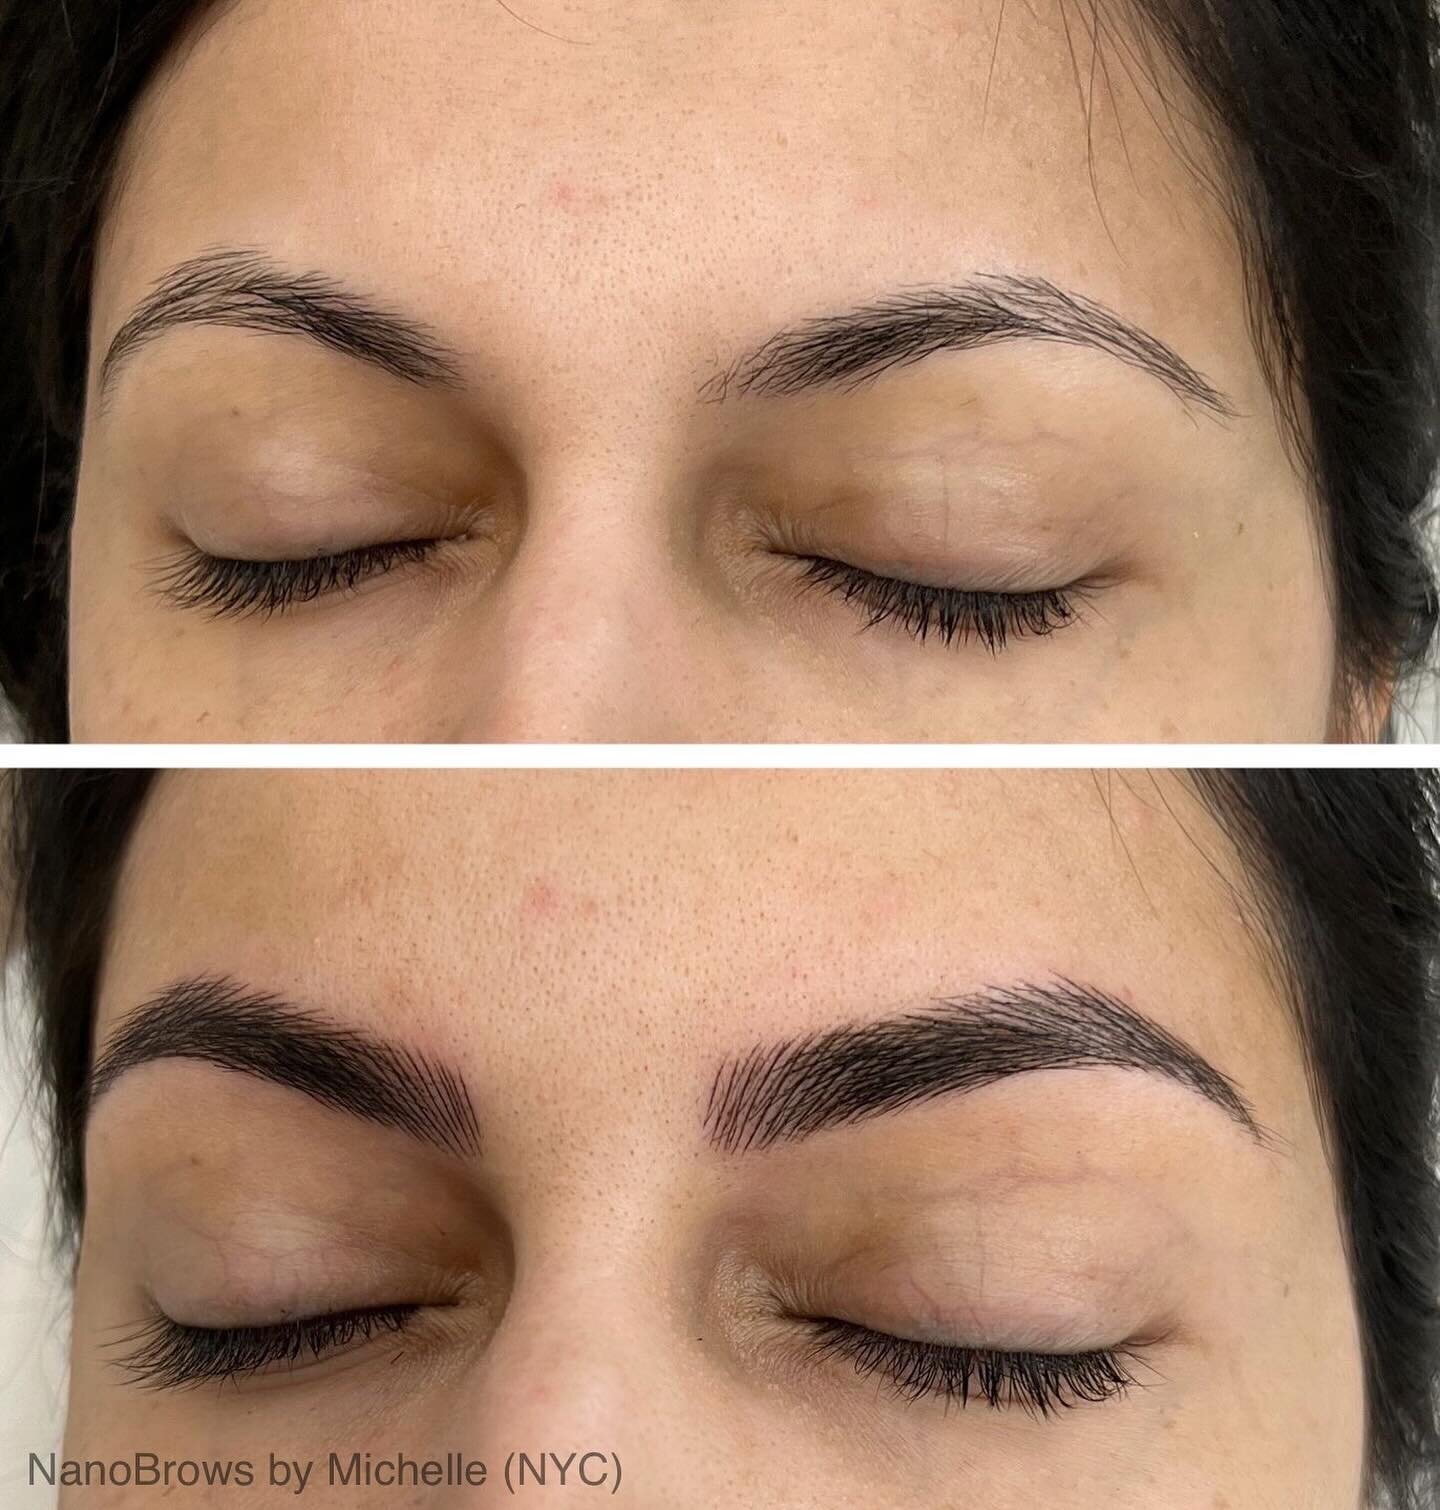 The brows you&rsquo;ve dreamed of! Crisp natural looking strokes created with our NanoBrows technique create this enhanced brow&hellip; still you but better. 
.
Our NanoBrows treatment uses a single very fine needle for very natural-looking results, 